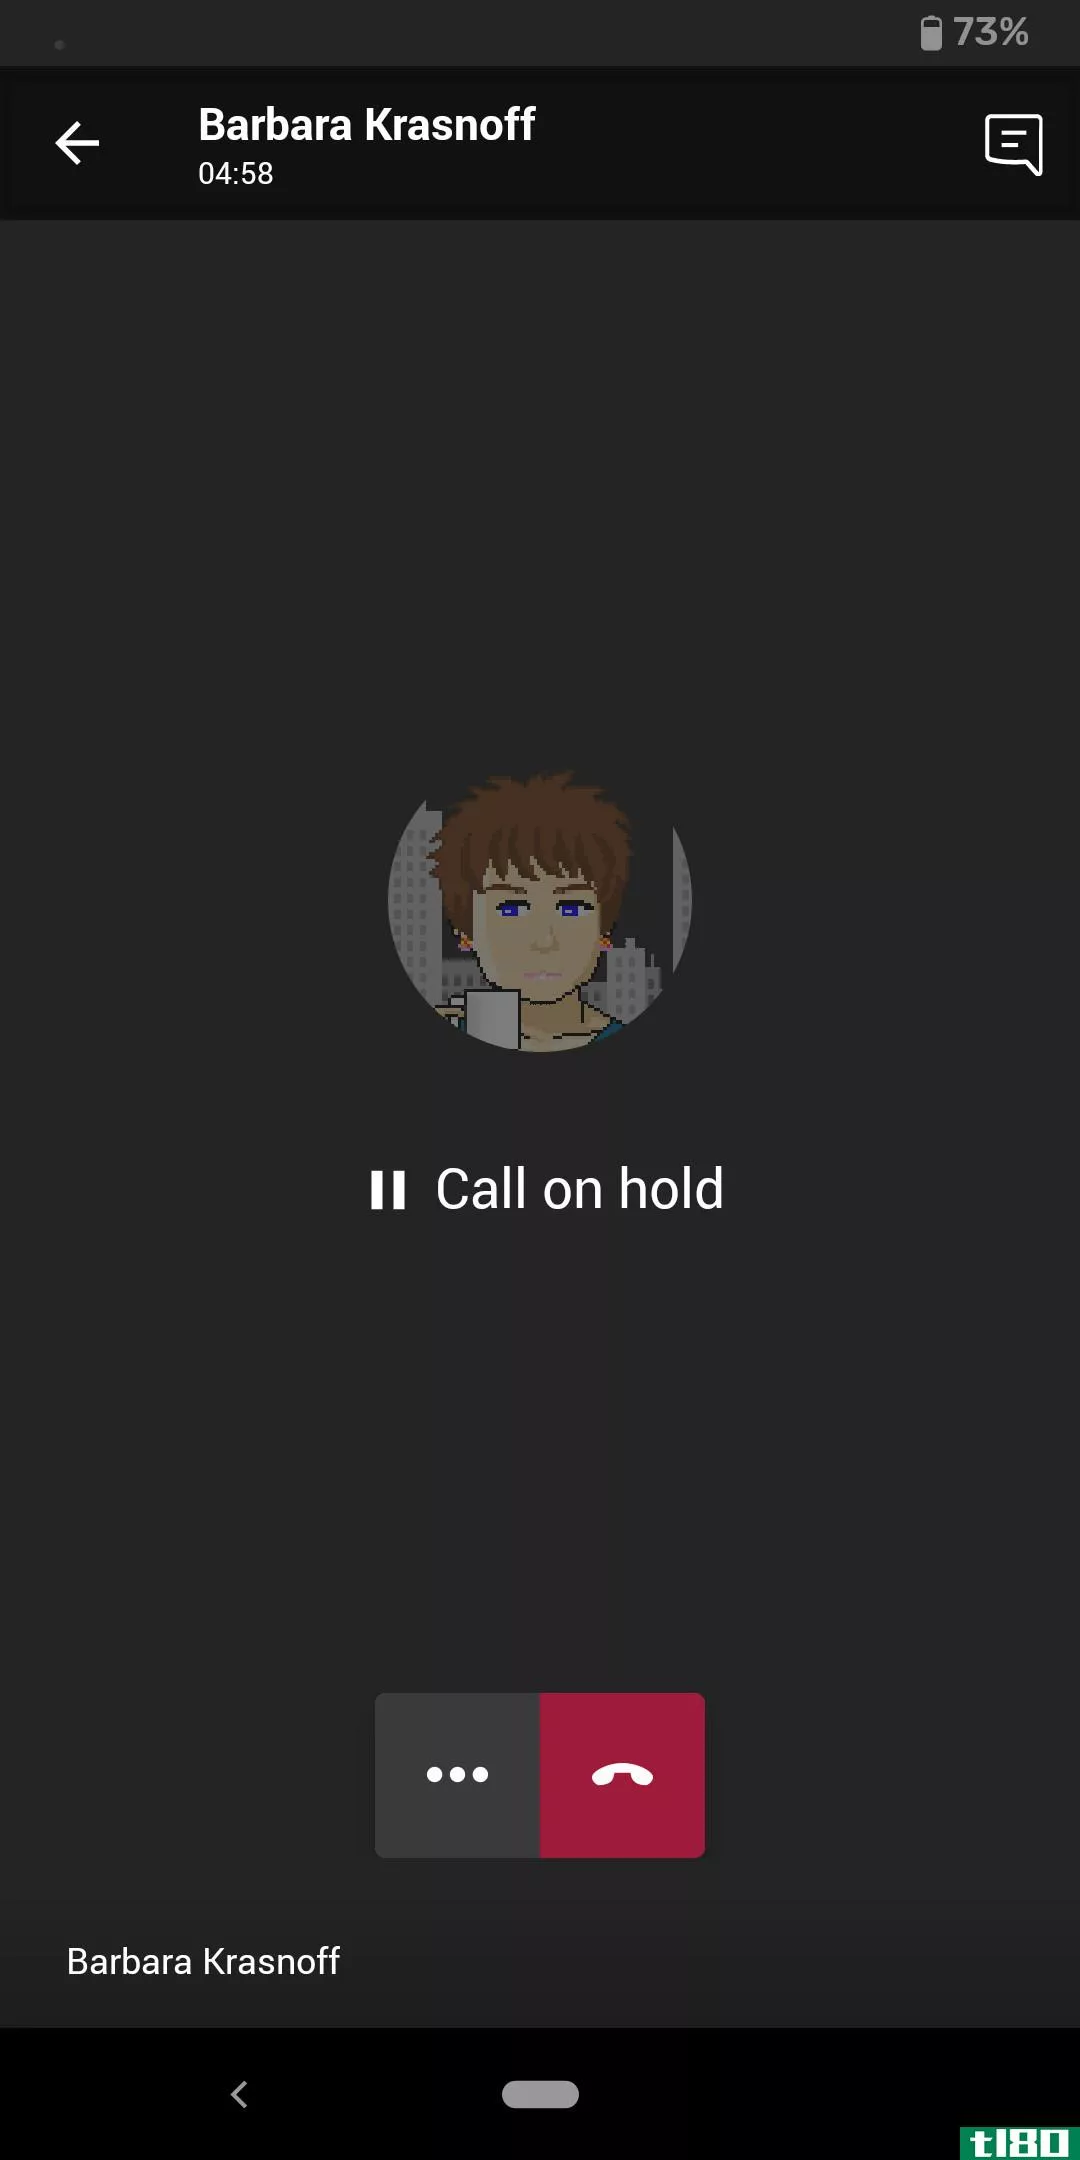 When you make a video or audio call, a caller can be put on hold.